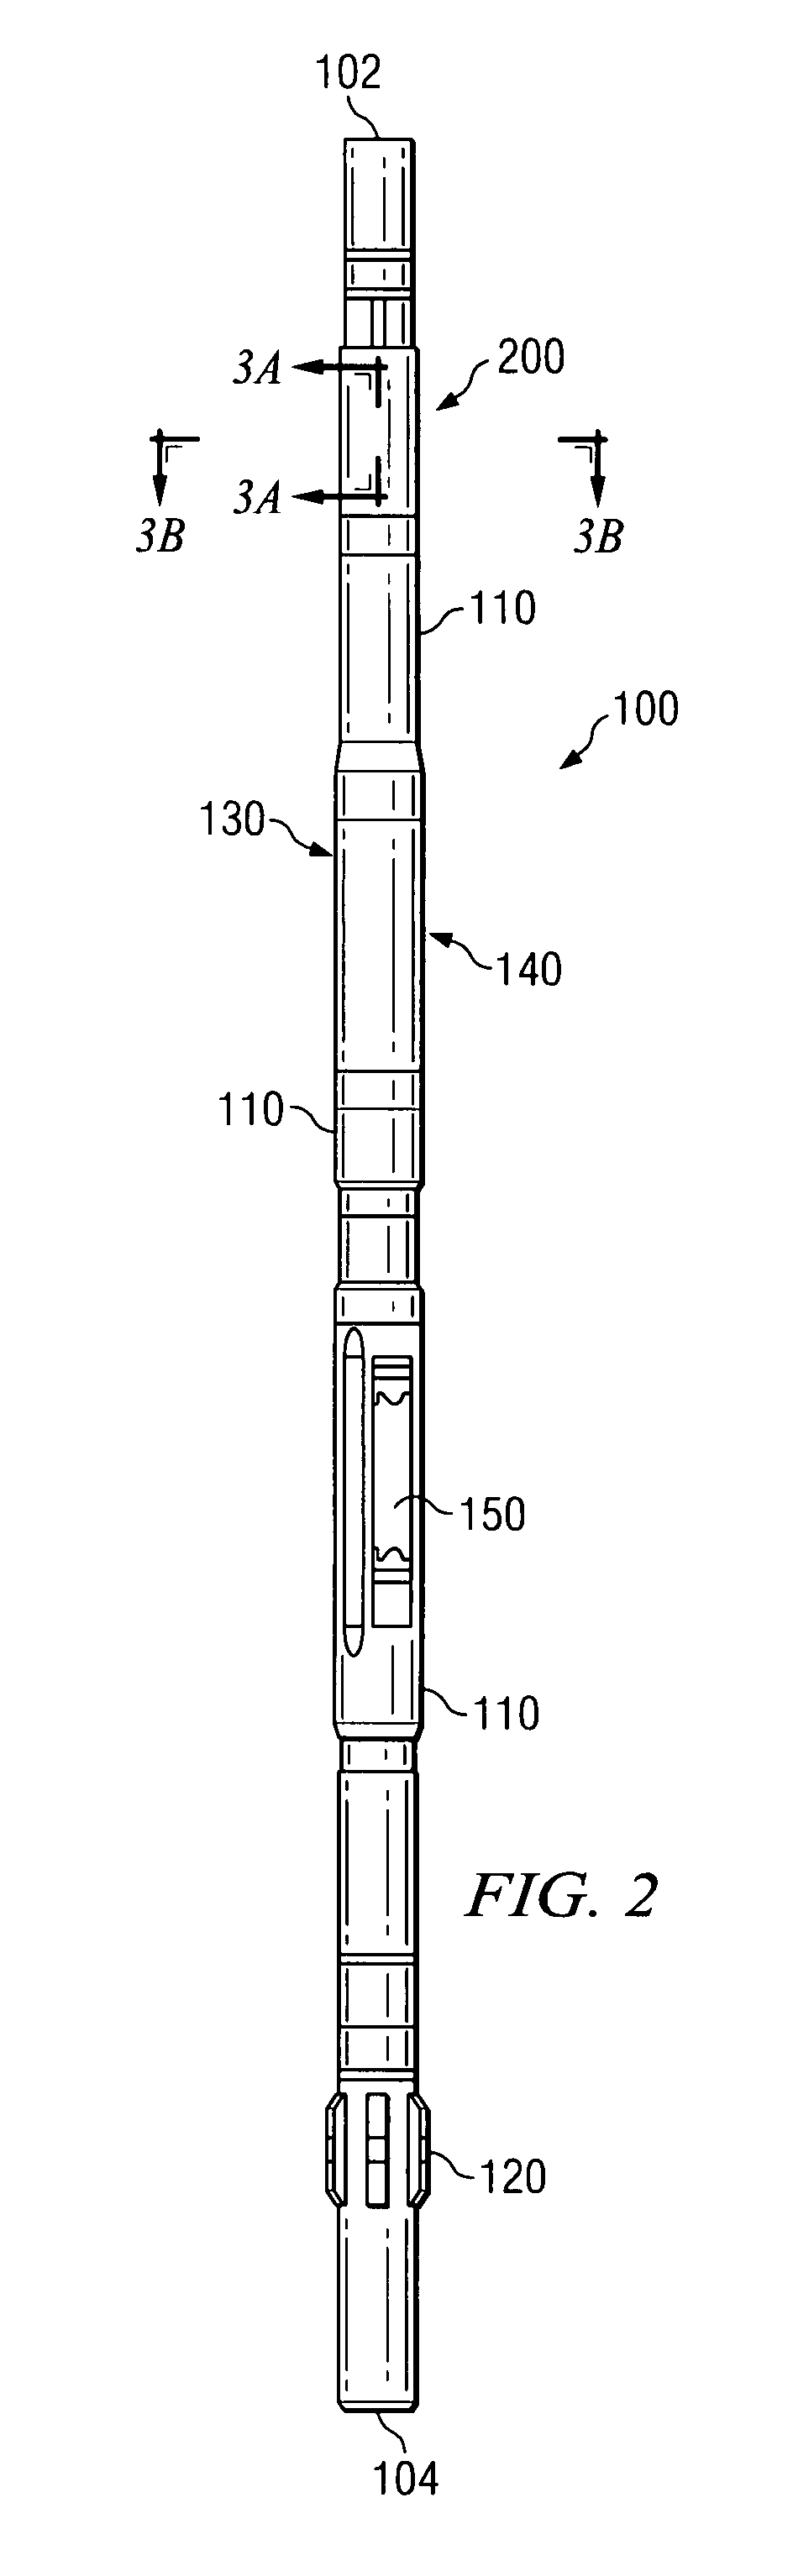 Non-contact capacitive datalink for a downhole assembly